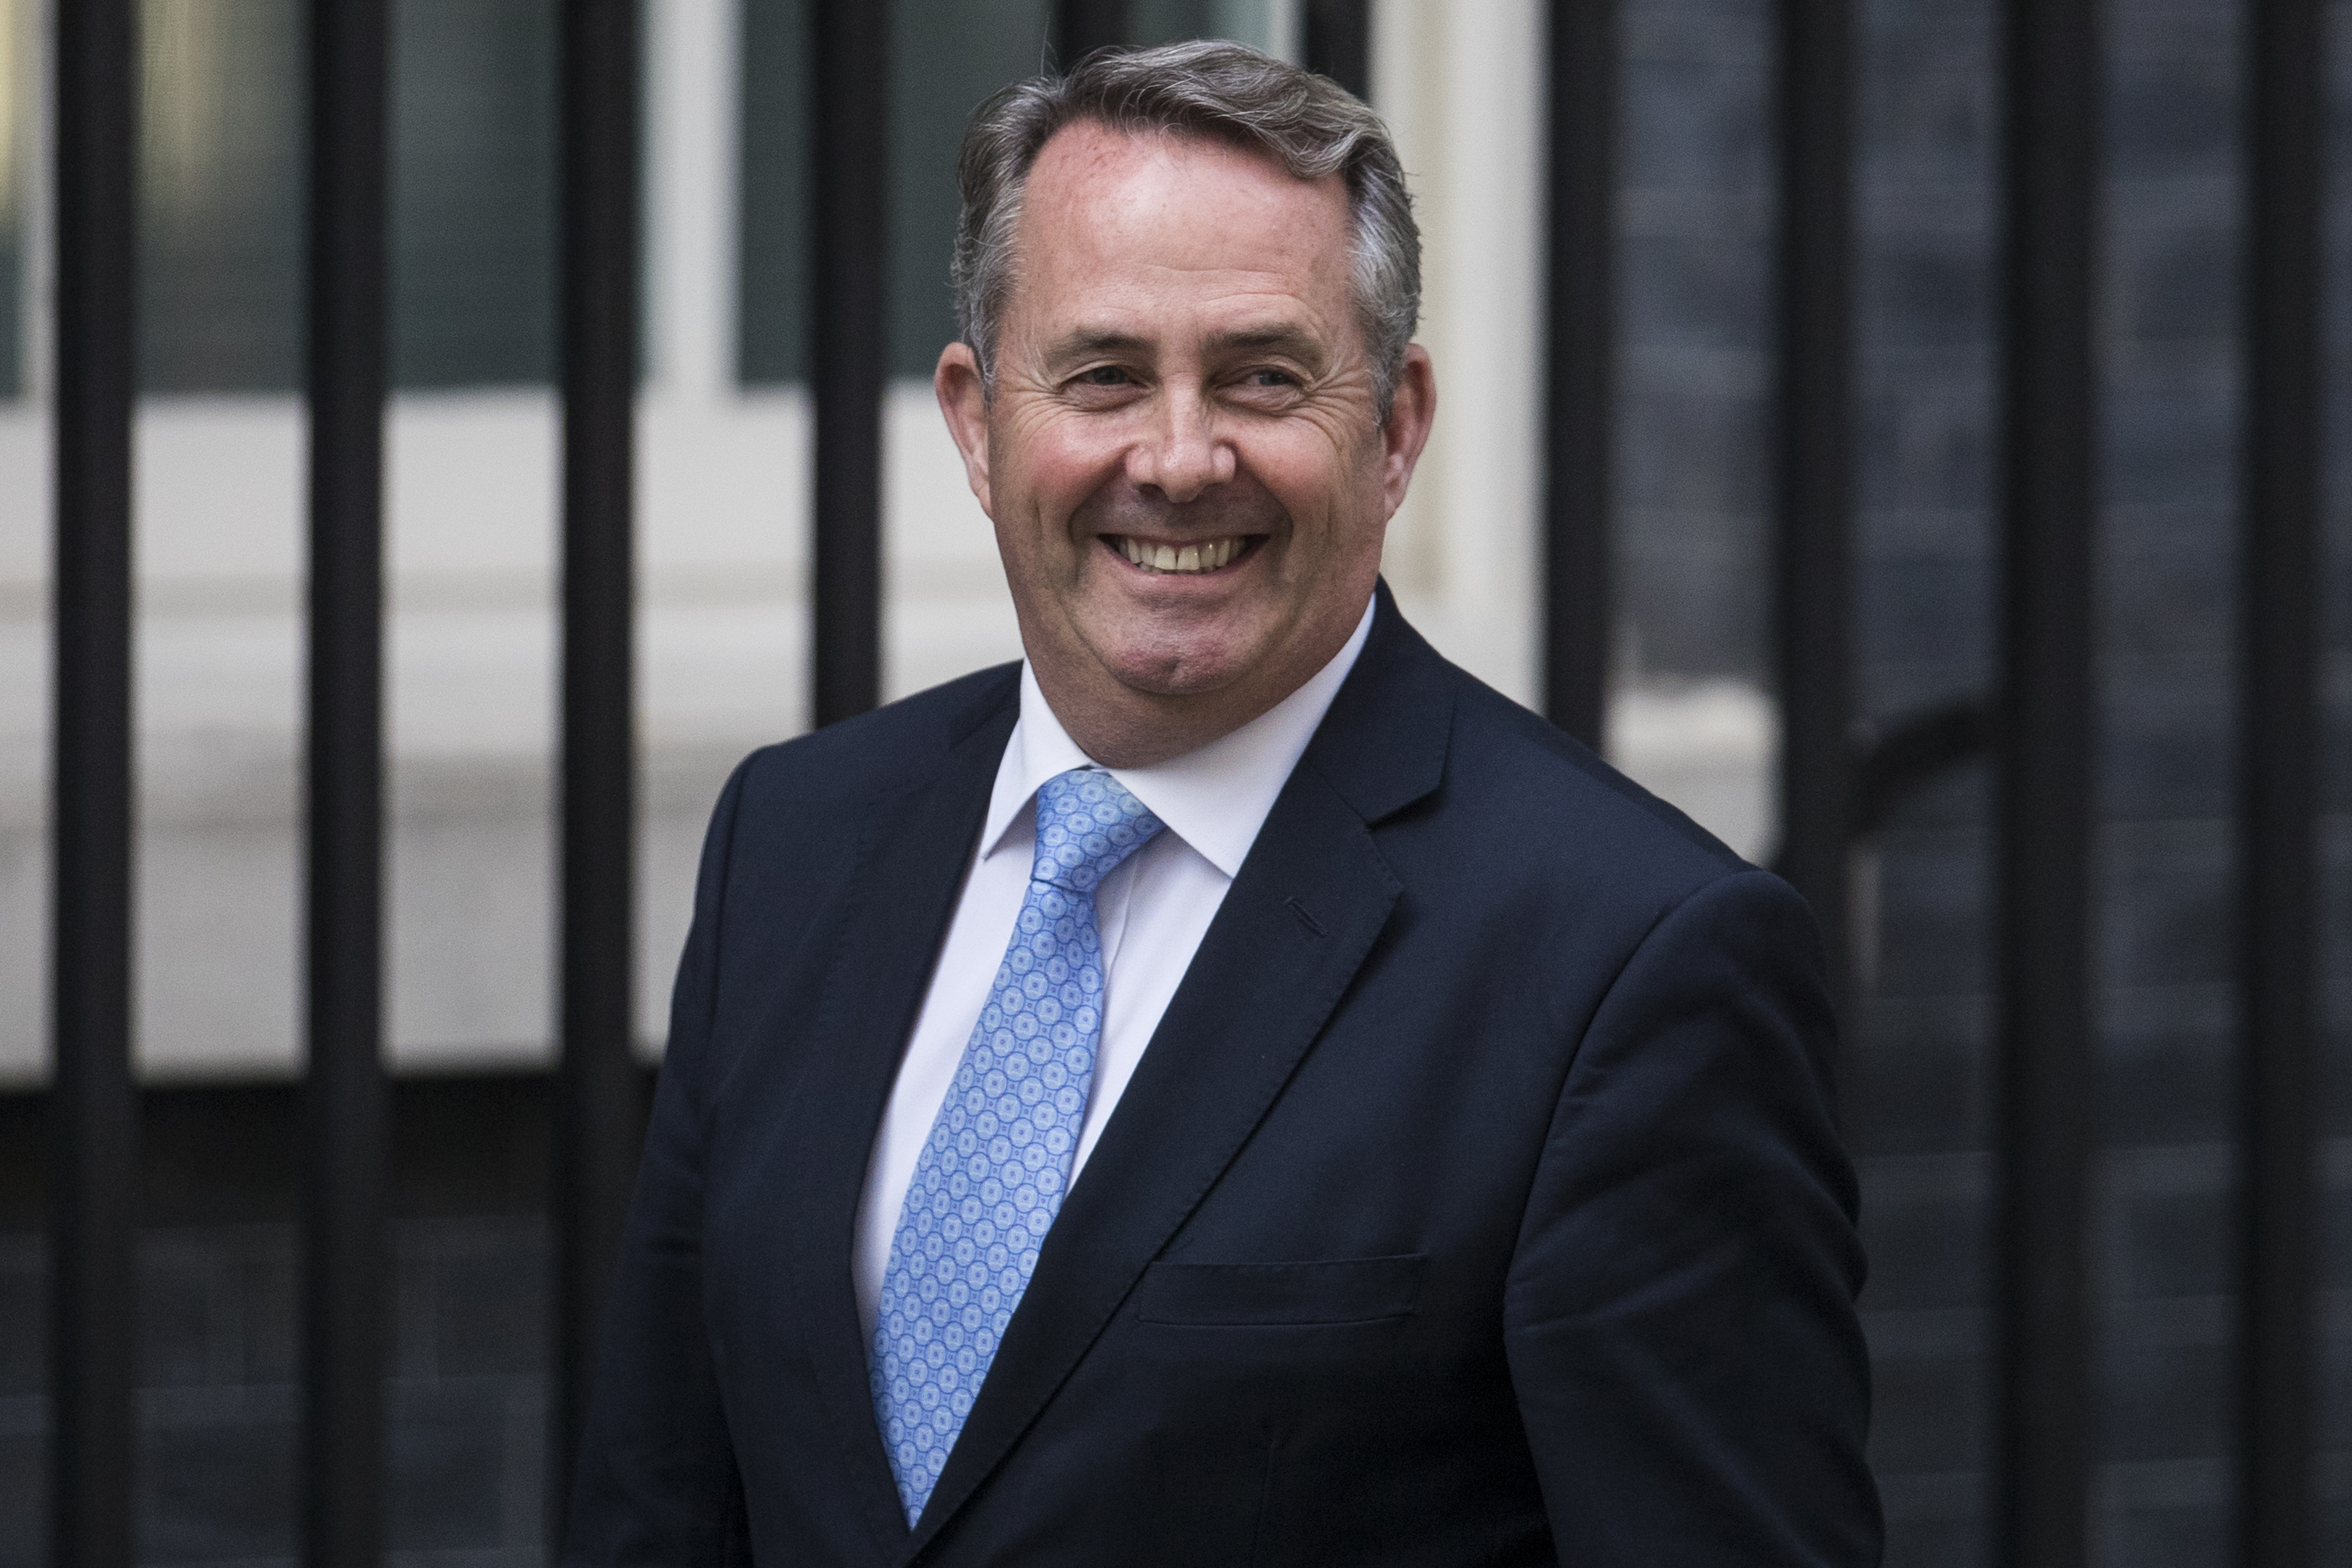 International Trade Secretary Liam Fox arrives at Downing Street on July 13, 2016 in London, England. (Carl Court/Getty Images)